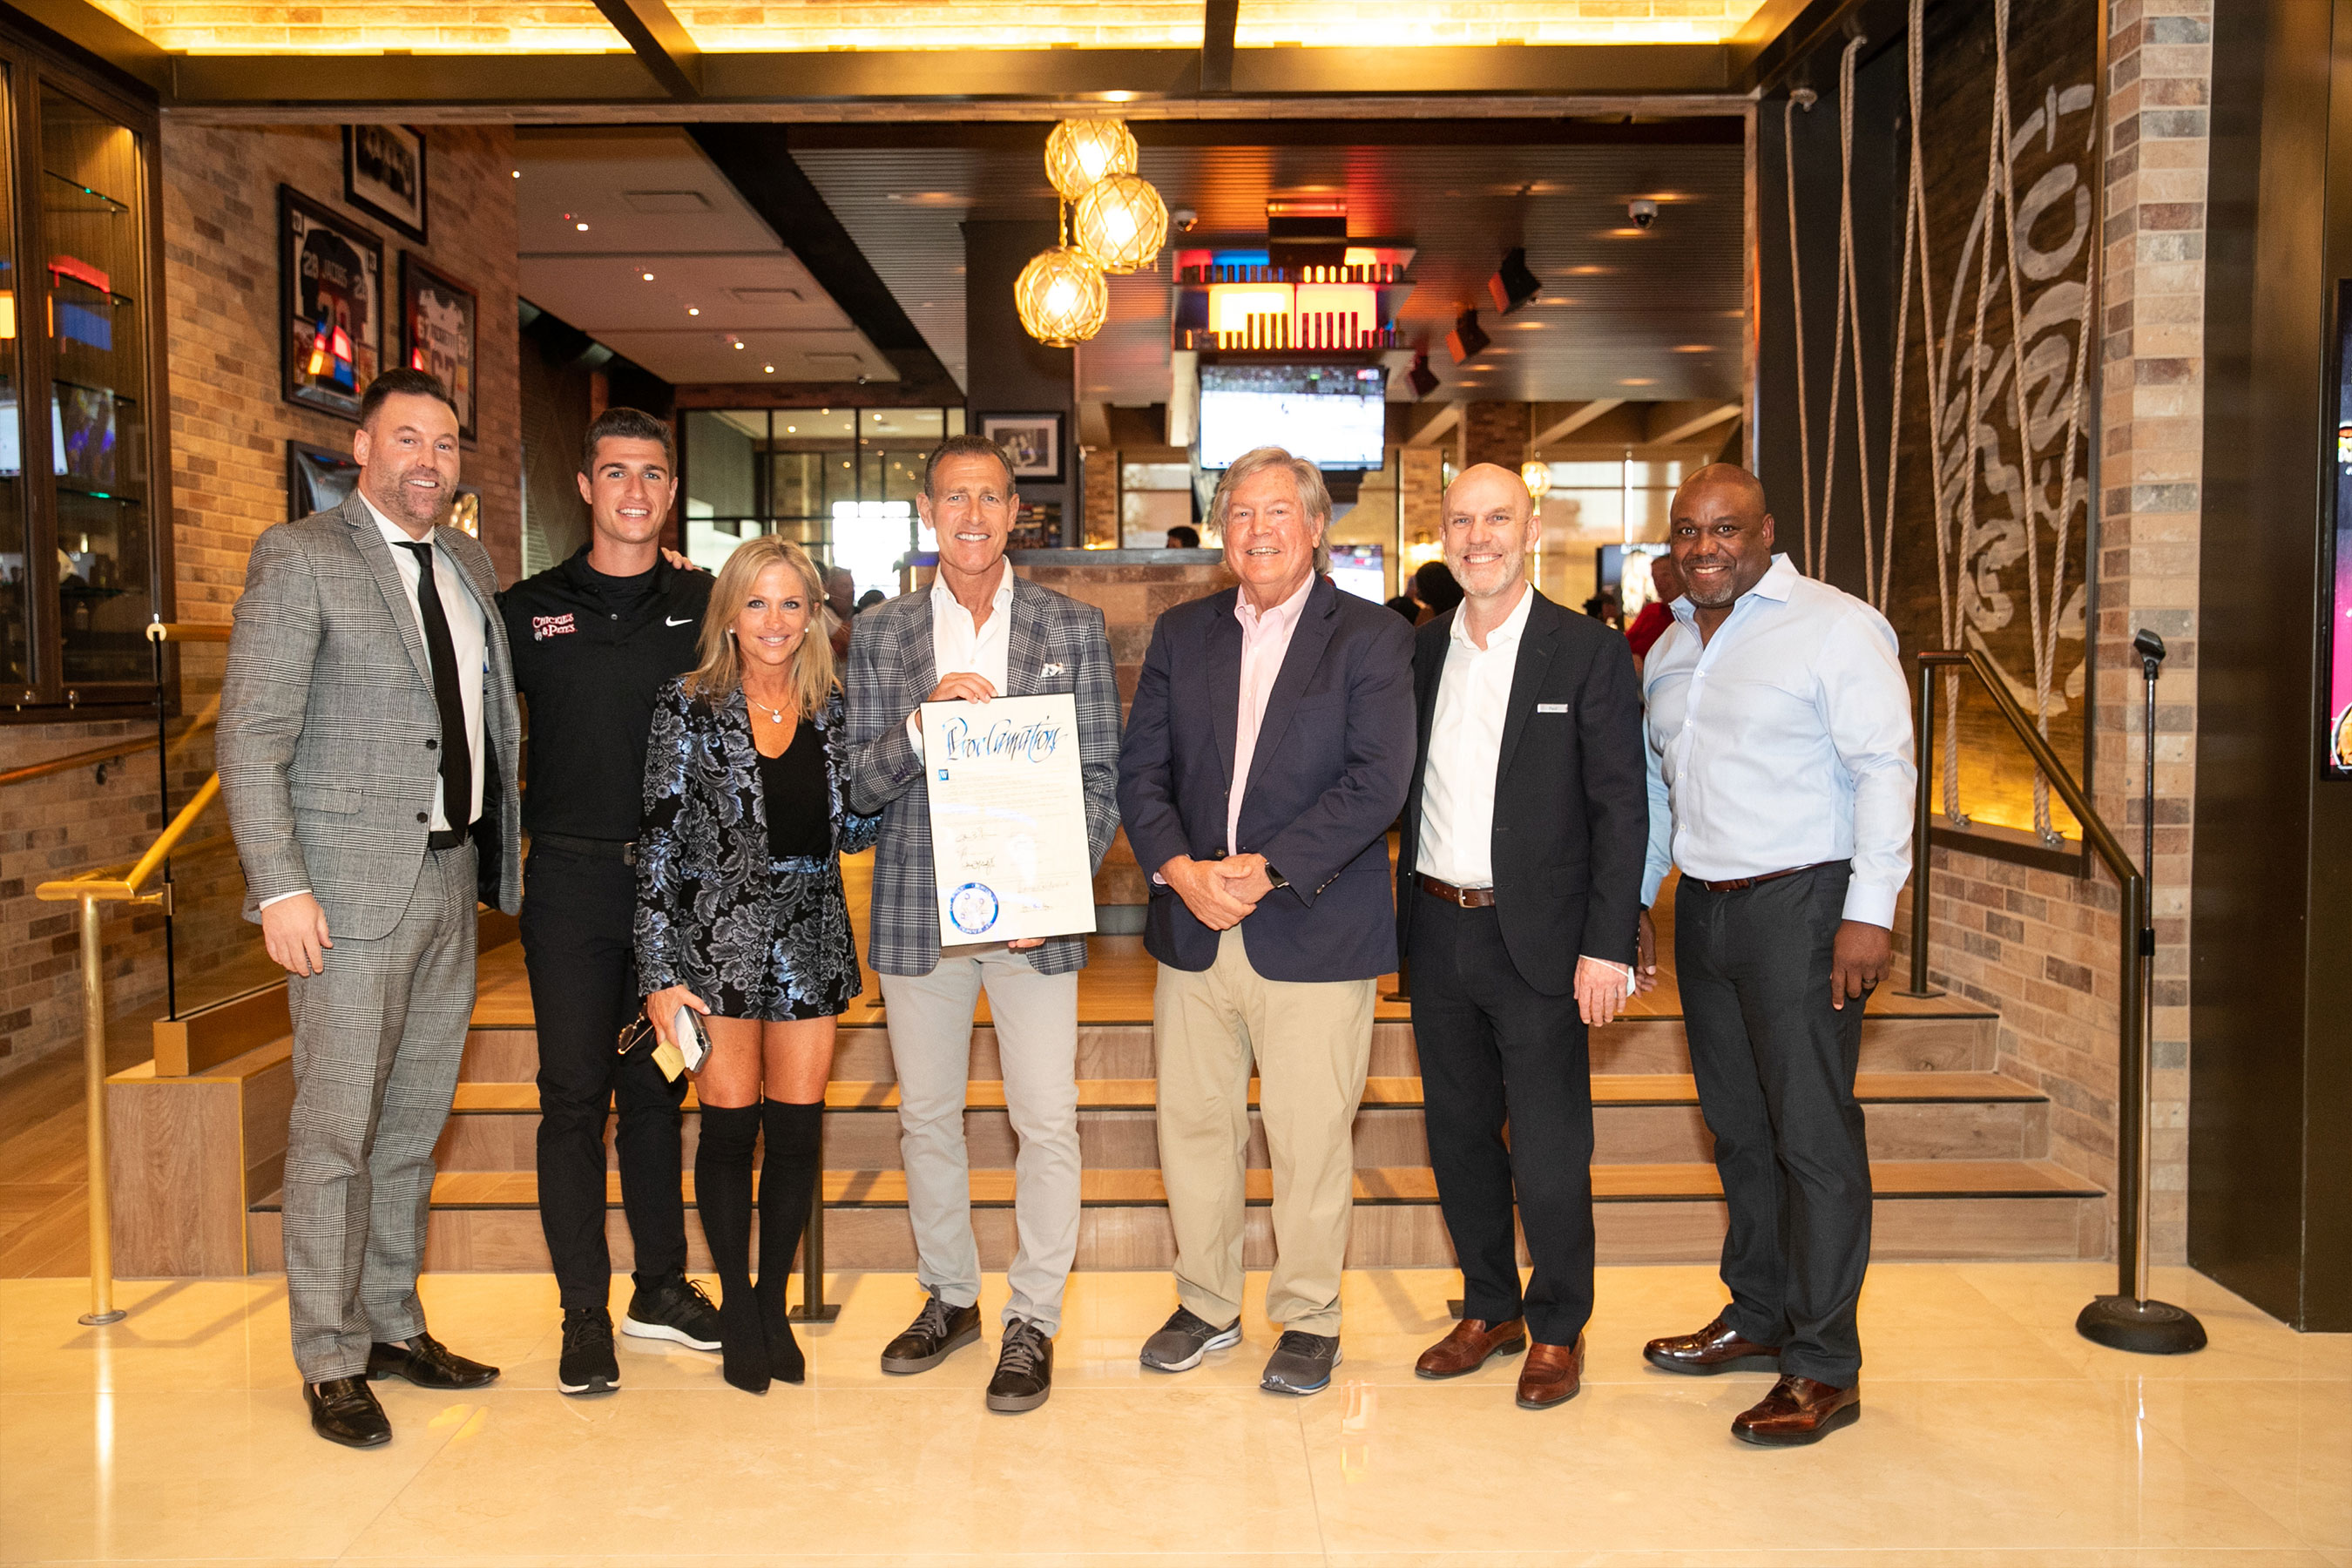 (L-R) Anthony Olheiser, Peter Ciarrocchi, Lisa Ciarrocchi, Pete Ciarrocchi, Clark County Commisioner Tick Segerblom, Paul Hobson and former Philadelphia Eagles player Mark McMillian at the grand opening of Chickie’s & Pete’s Crab House and Sports Bar inside SAHARA Las Vegas